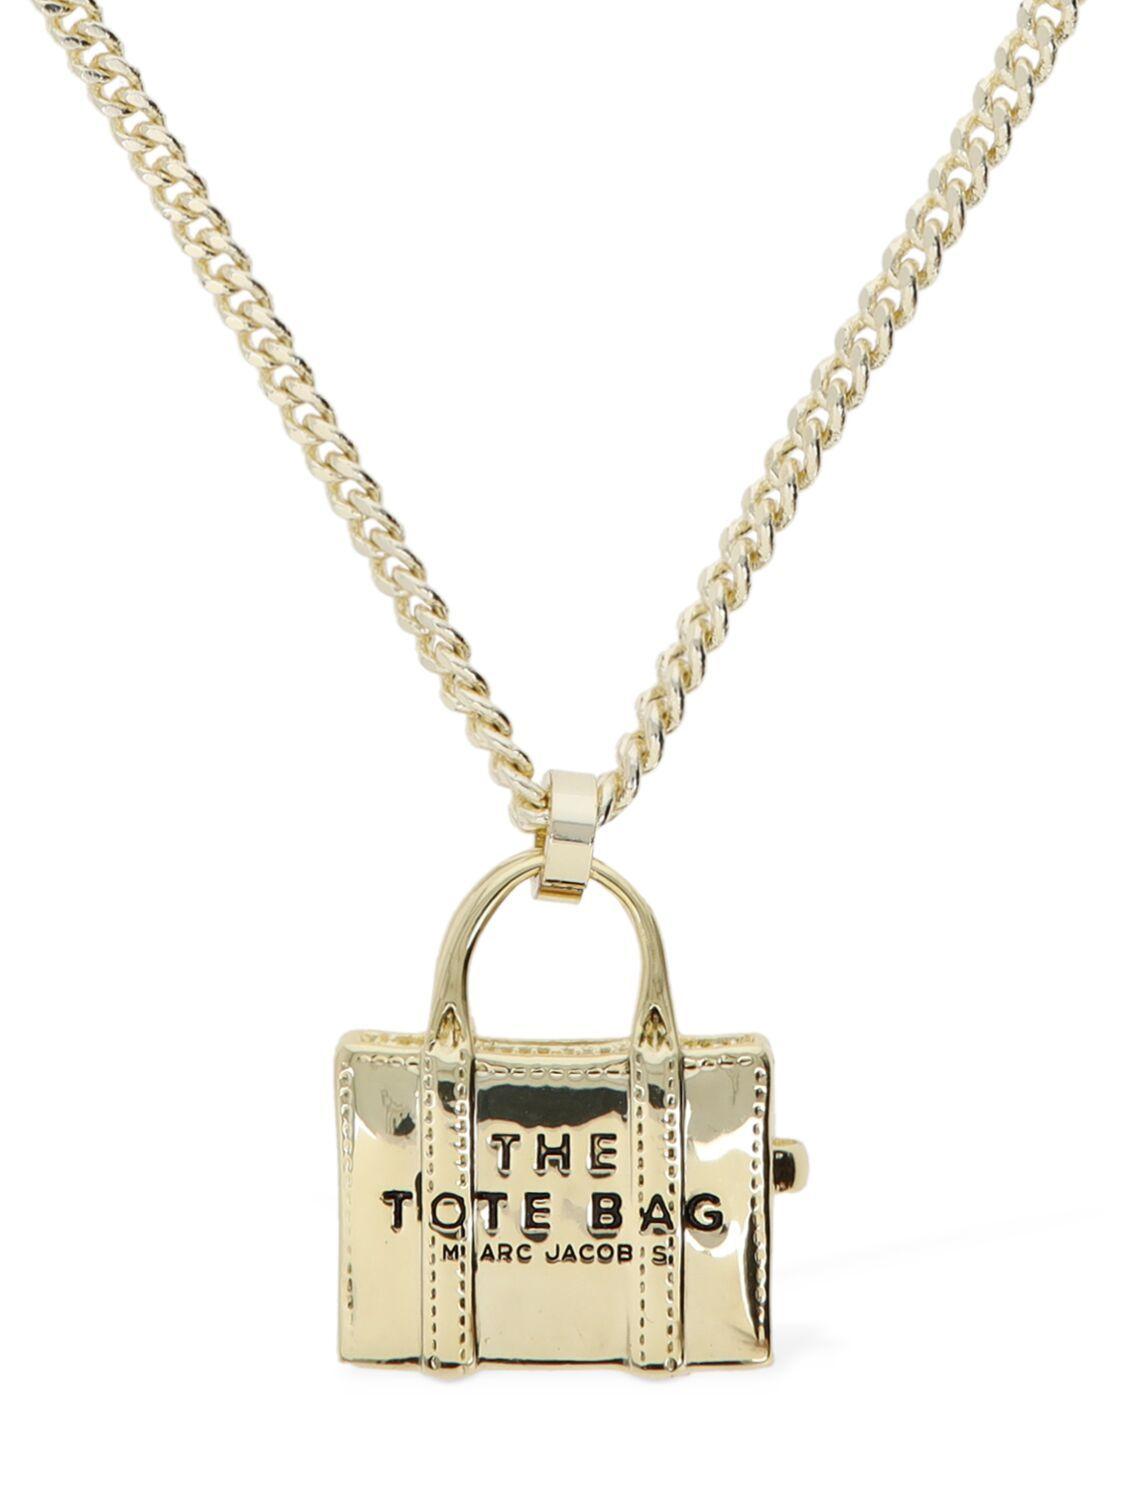 The Tote Bag Necklace, Marc Jacobs